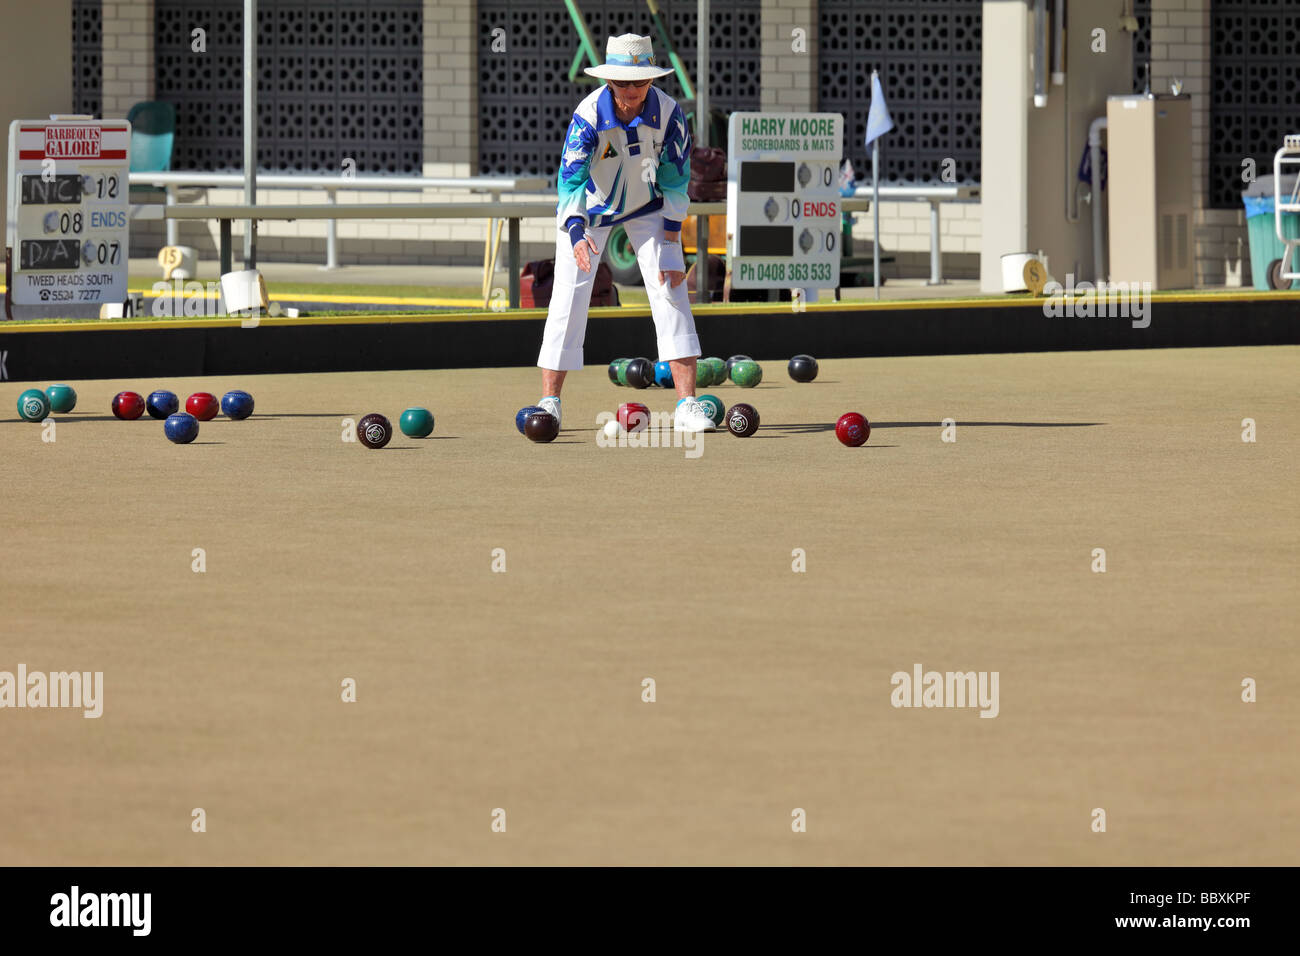 Woman at a lawn bowls tournament showing technique and bowling equipment Stock Photo